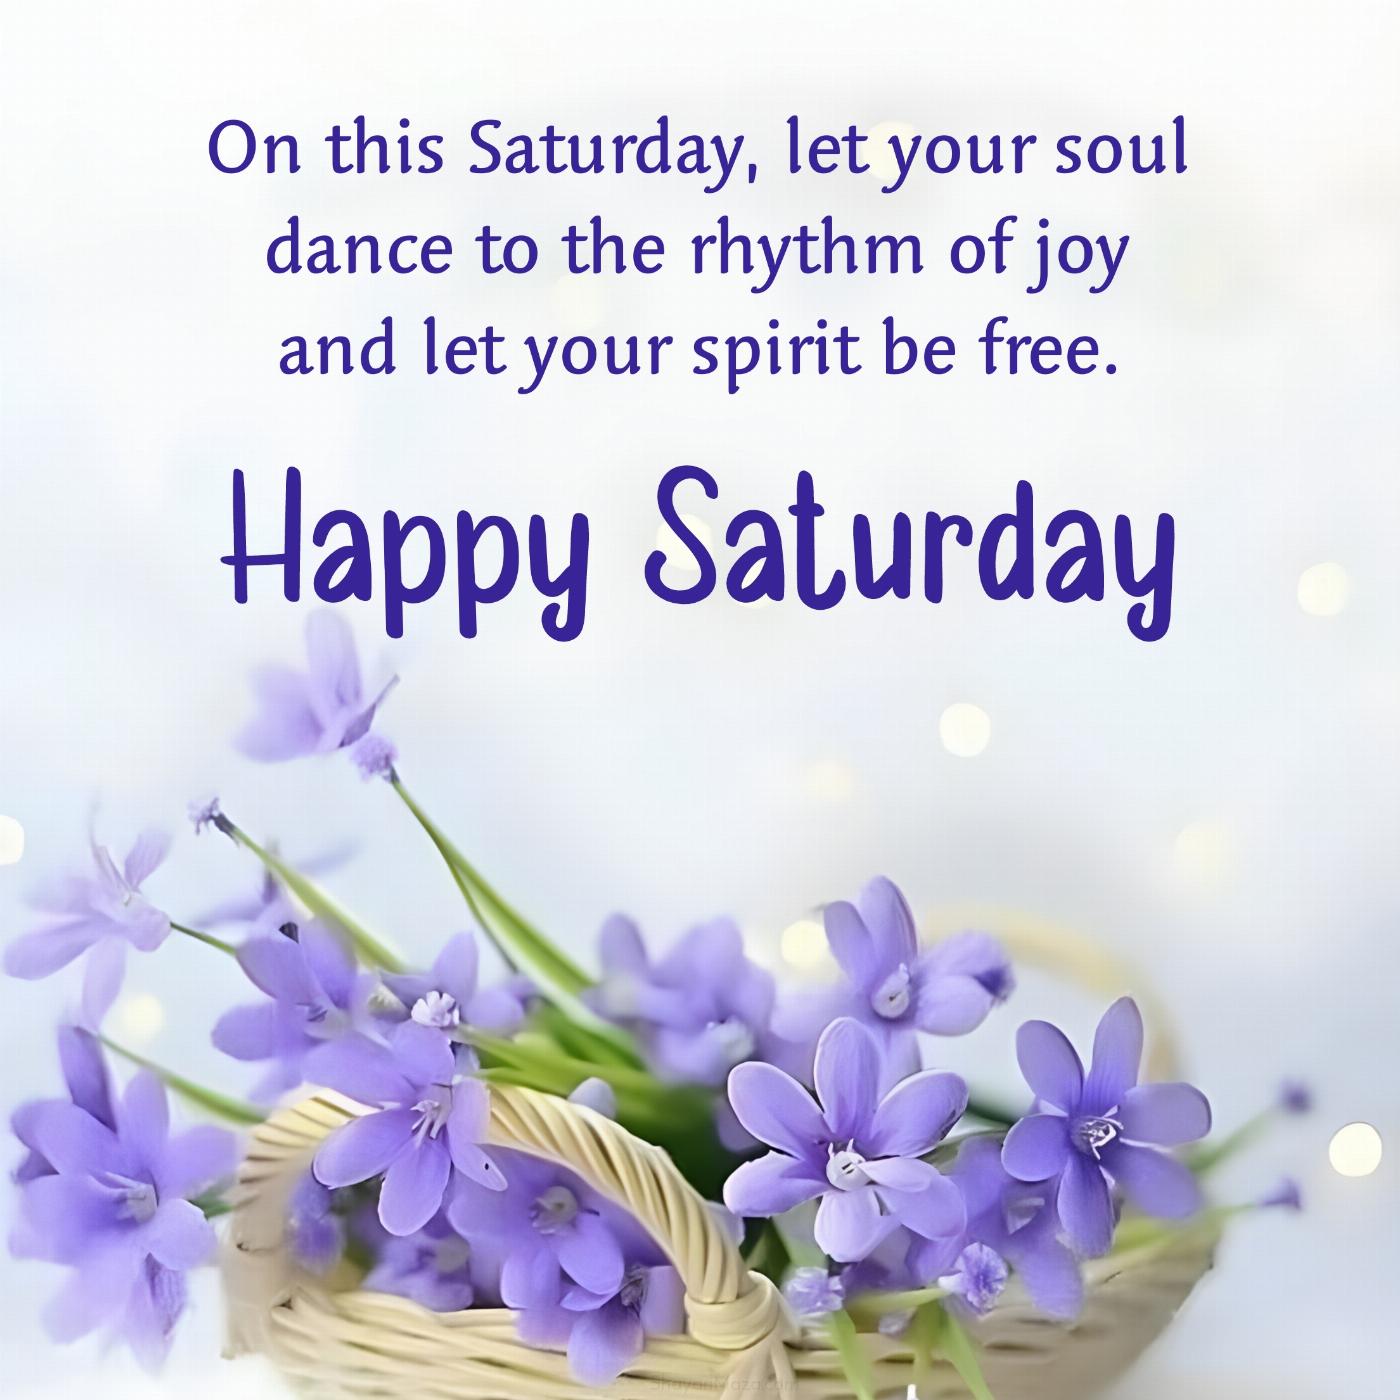 On this Saturday let your soul dance to the rhythm of joy